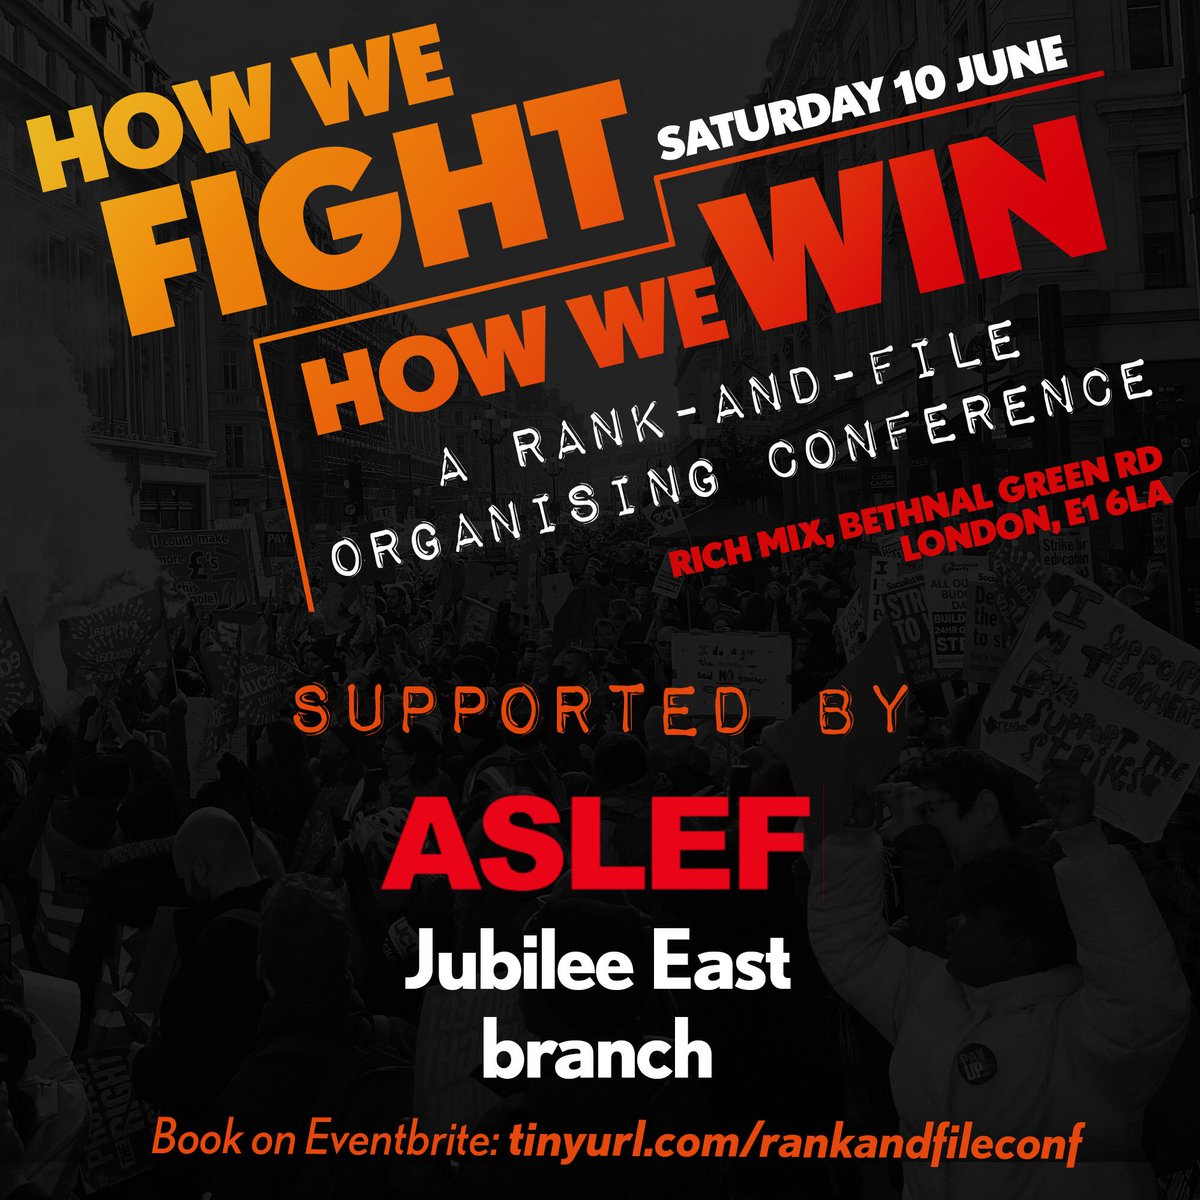 Great to see my branch and many more supporting this event where grassroots trade unionists come together to organise HOW WE FIGHT, HOW WE WIN ✊🏾 Register to be part of the movement. eventbrite.co.uk/e/how-we-fight…

#rankandfile #conference #aslef #tradeunion #London #resist